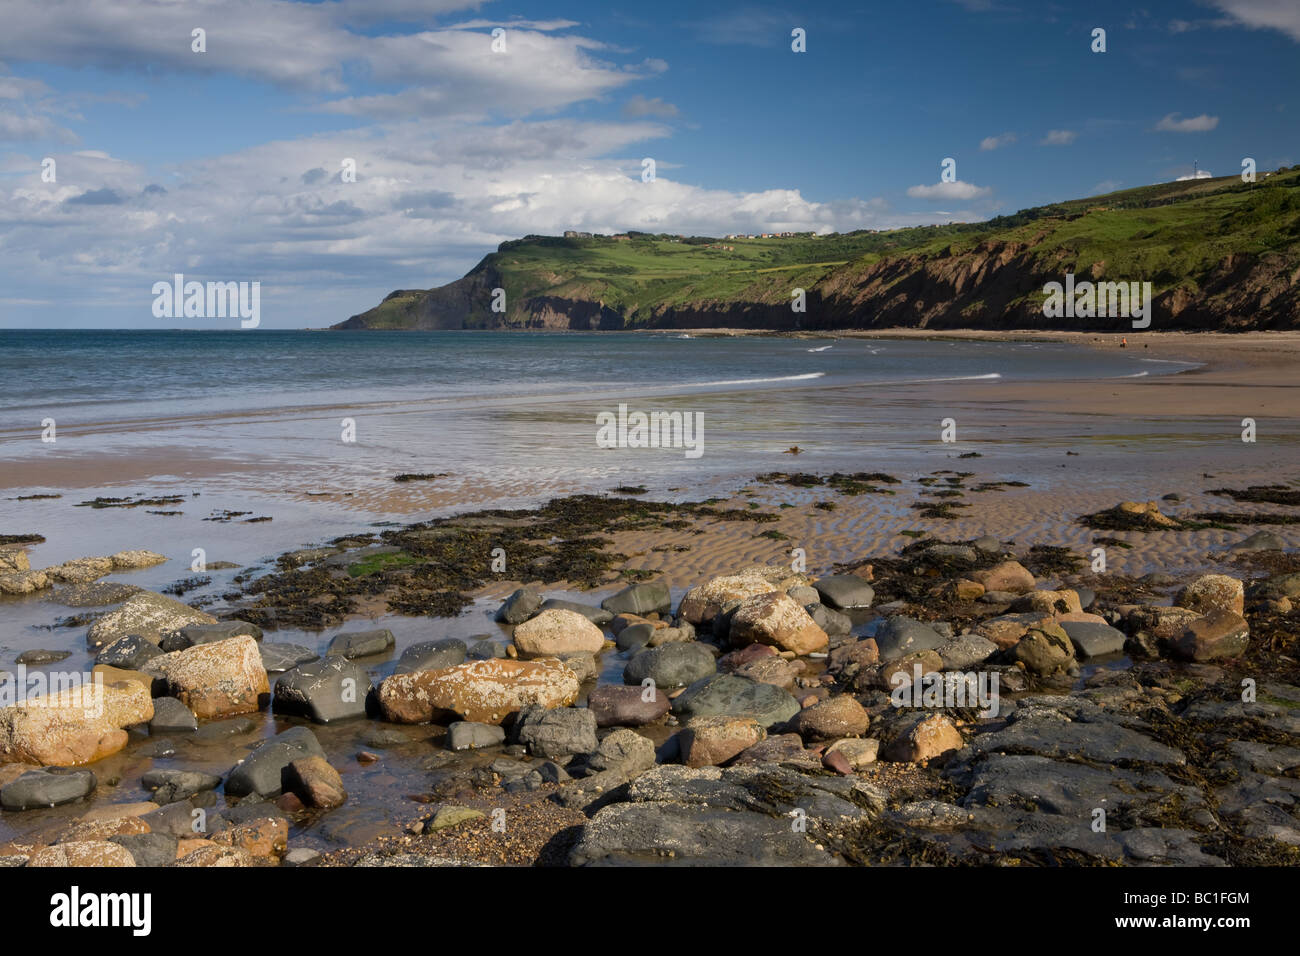 The beach and cliffs at Ravenscar on the North Yorkshire Coast Stock Photo